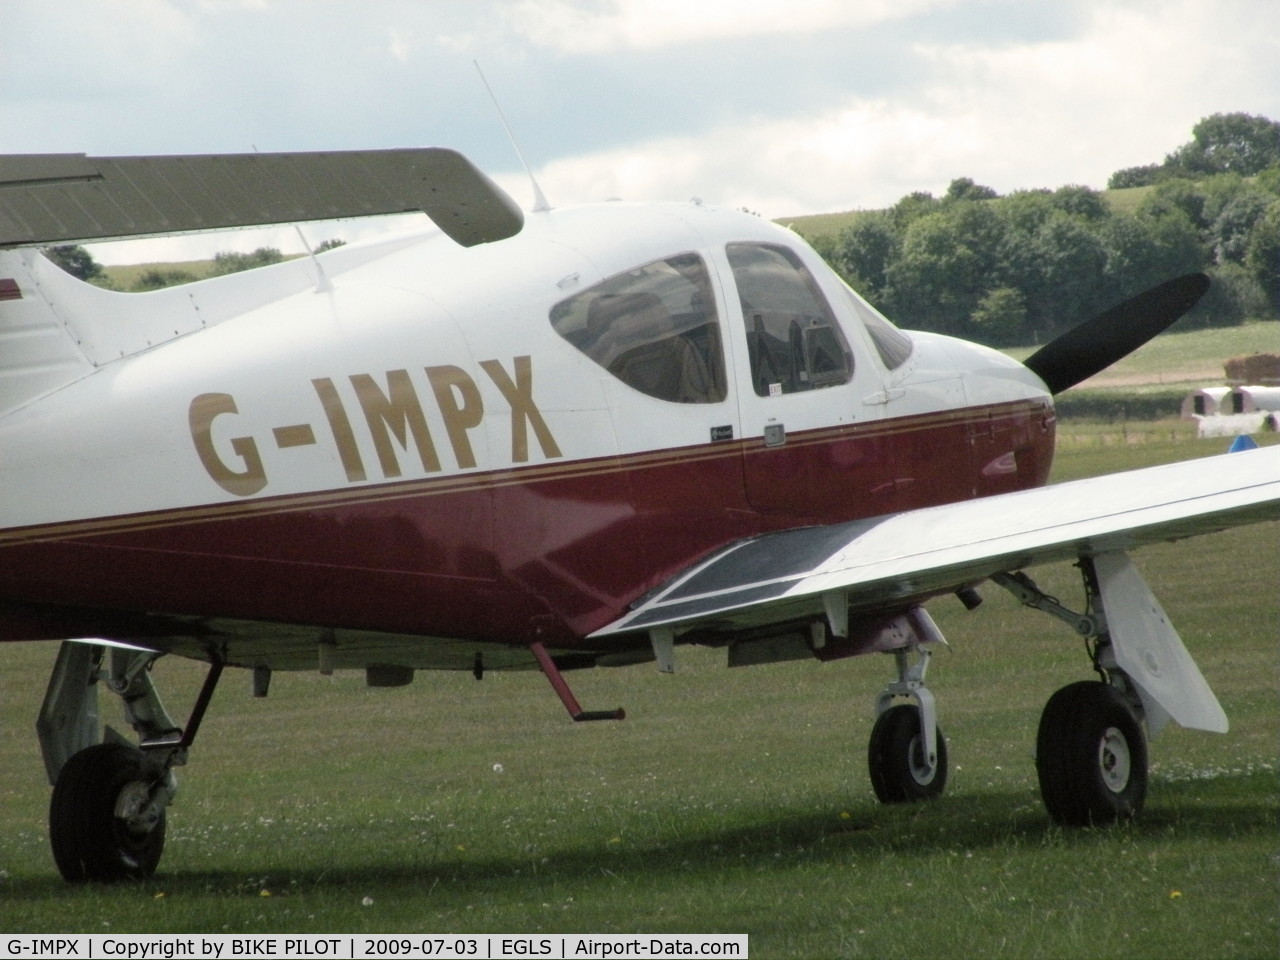 G-IMPX, 1976 Rockwell Commander 112B C/N 512, COMMANDER OWNED BY IMPATEX COMPUTER SYSTEMS